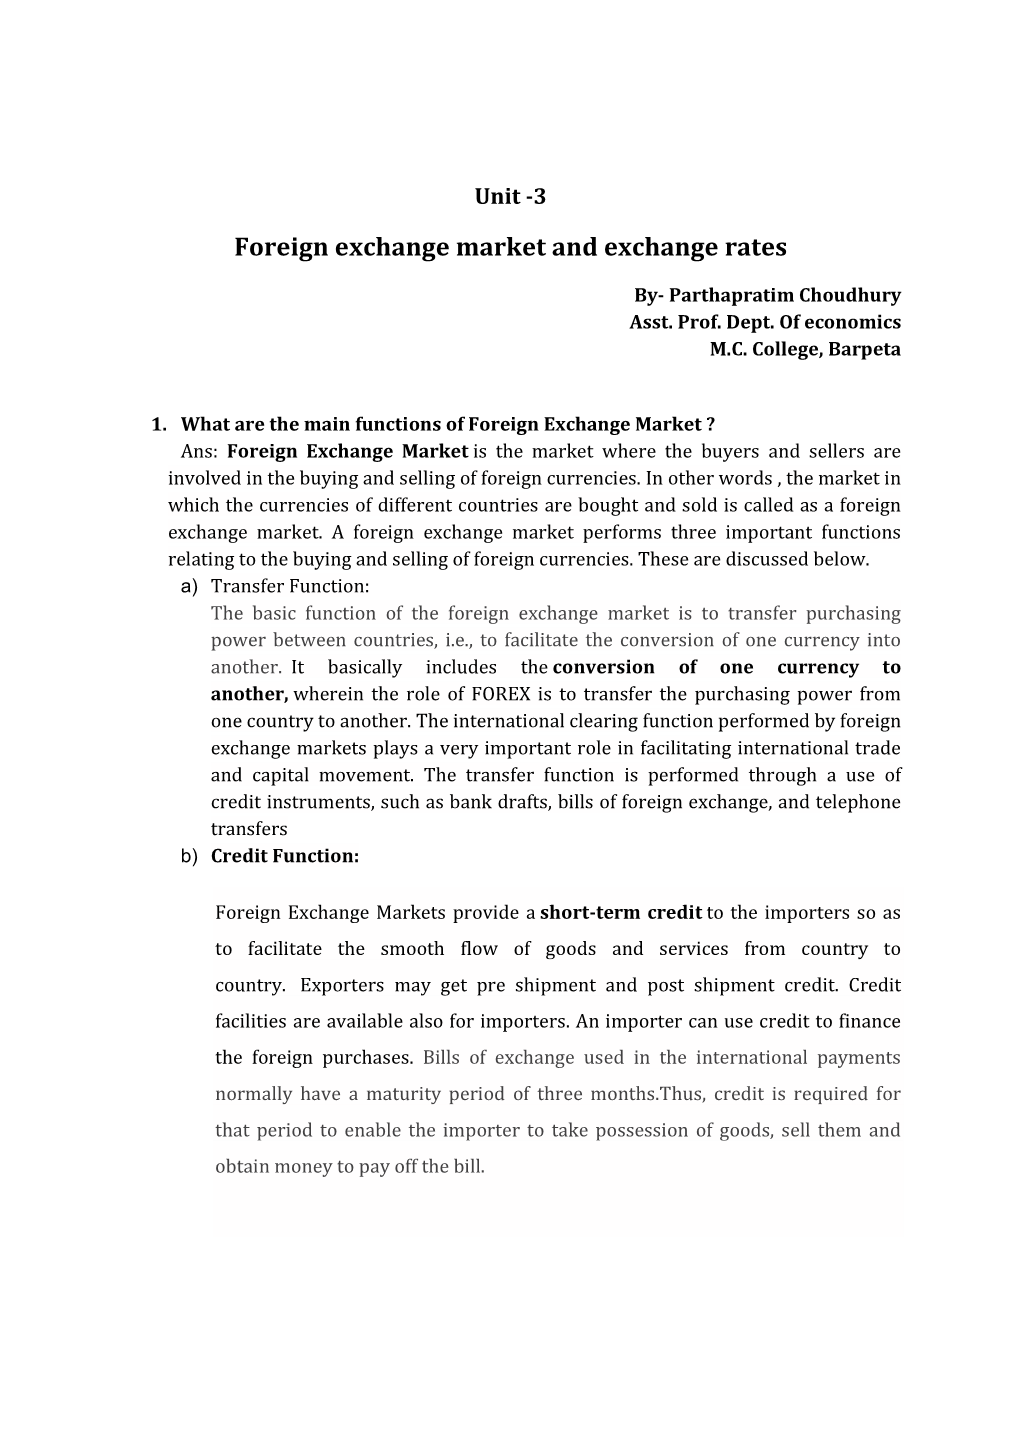 Foreign Exchange Market and Exchange Rates